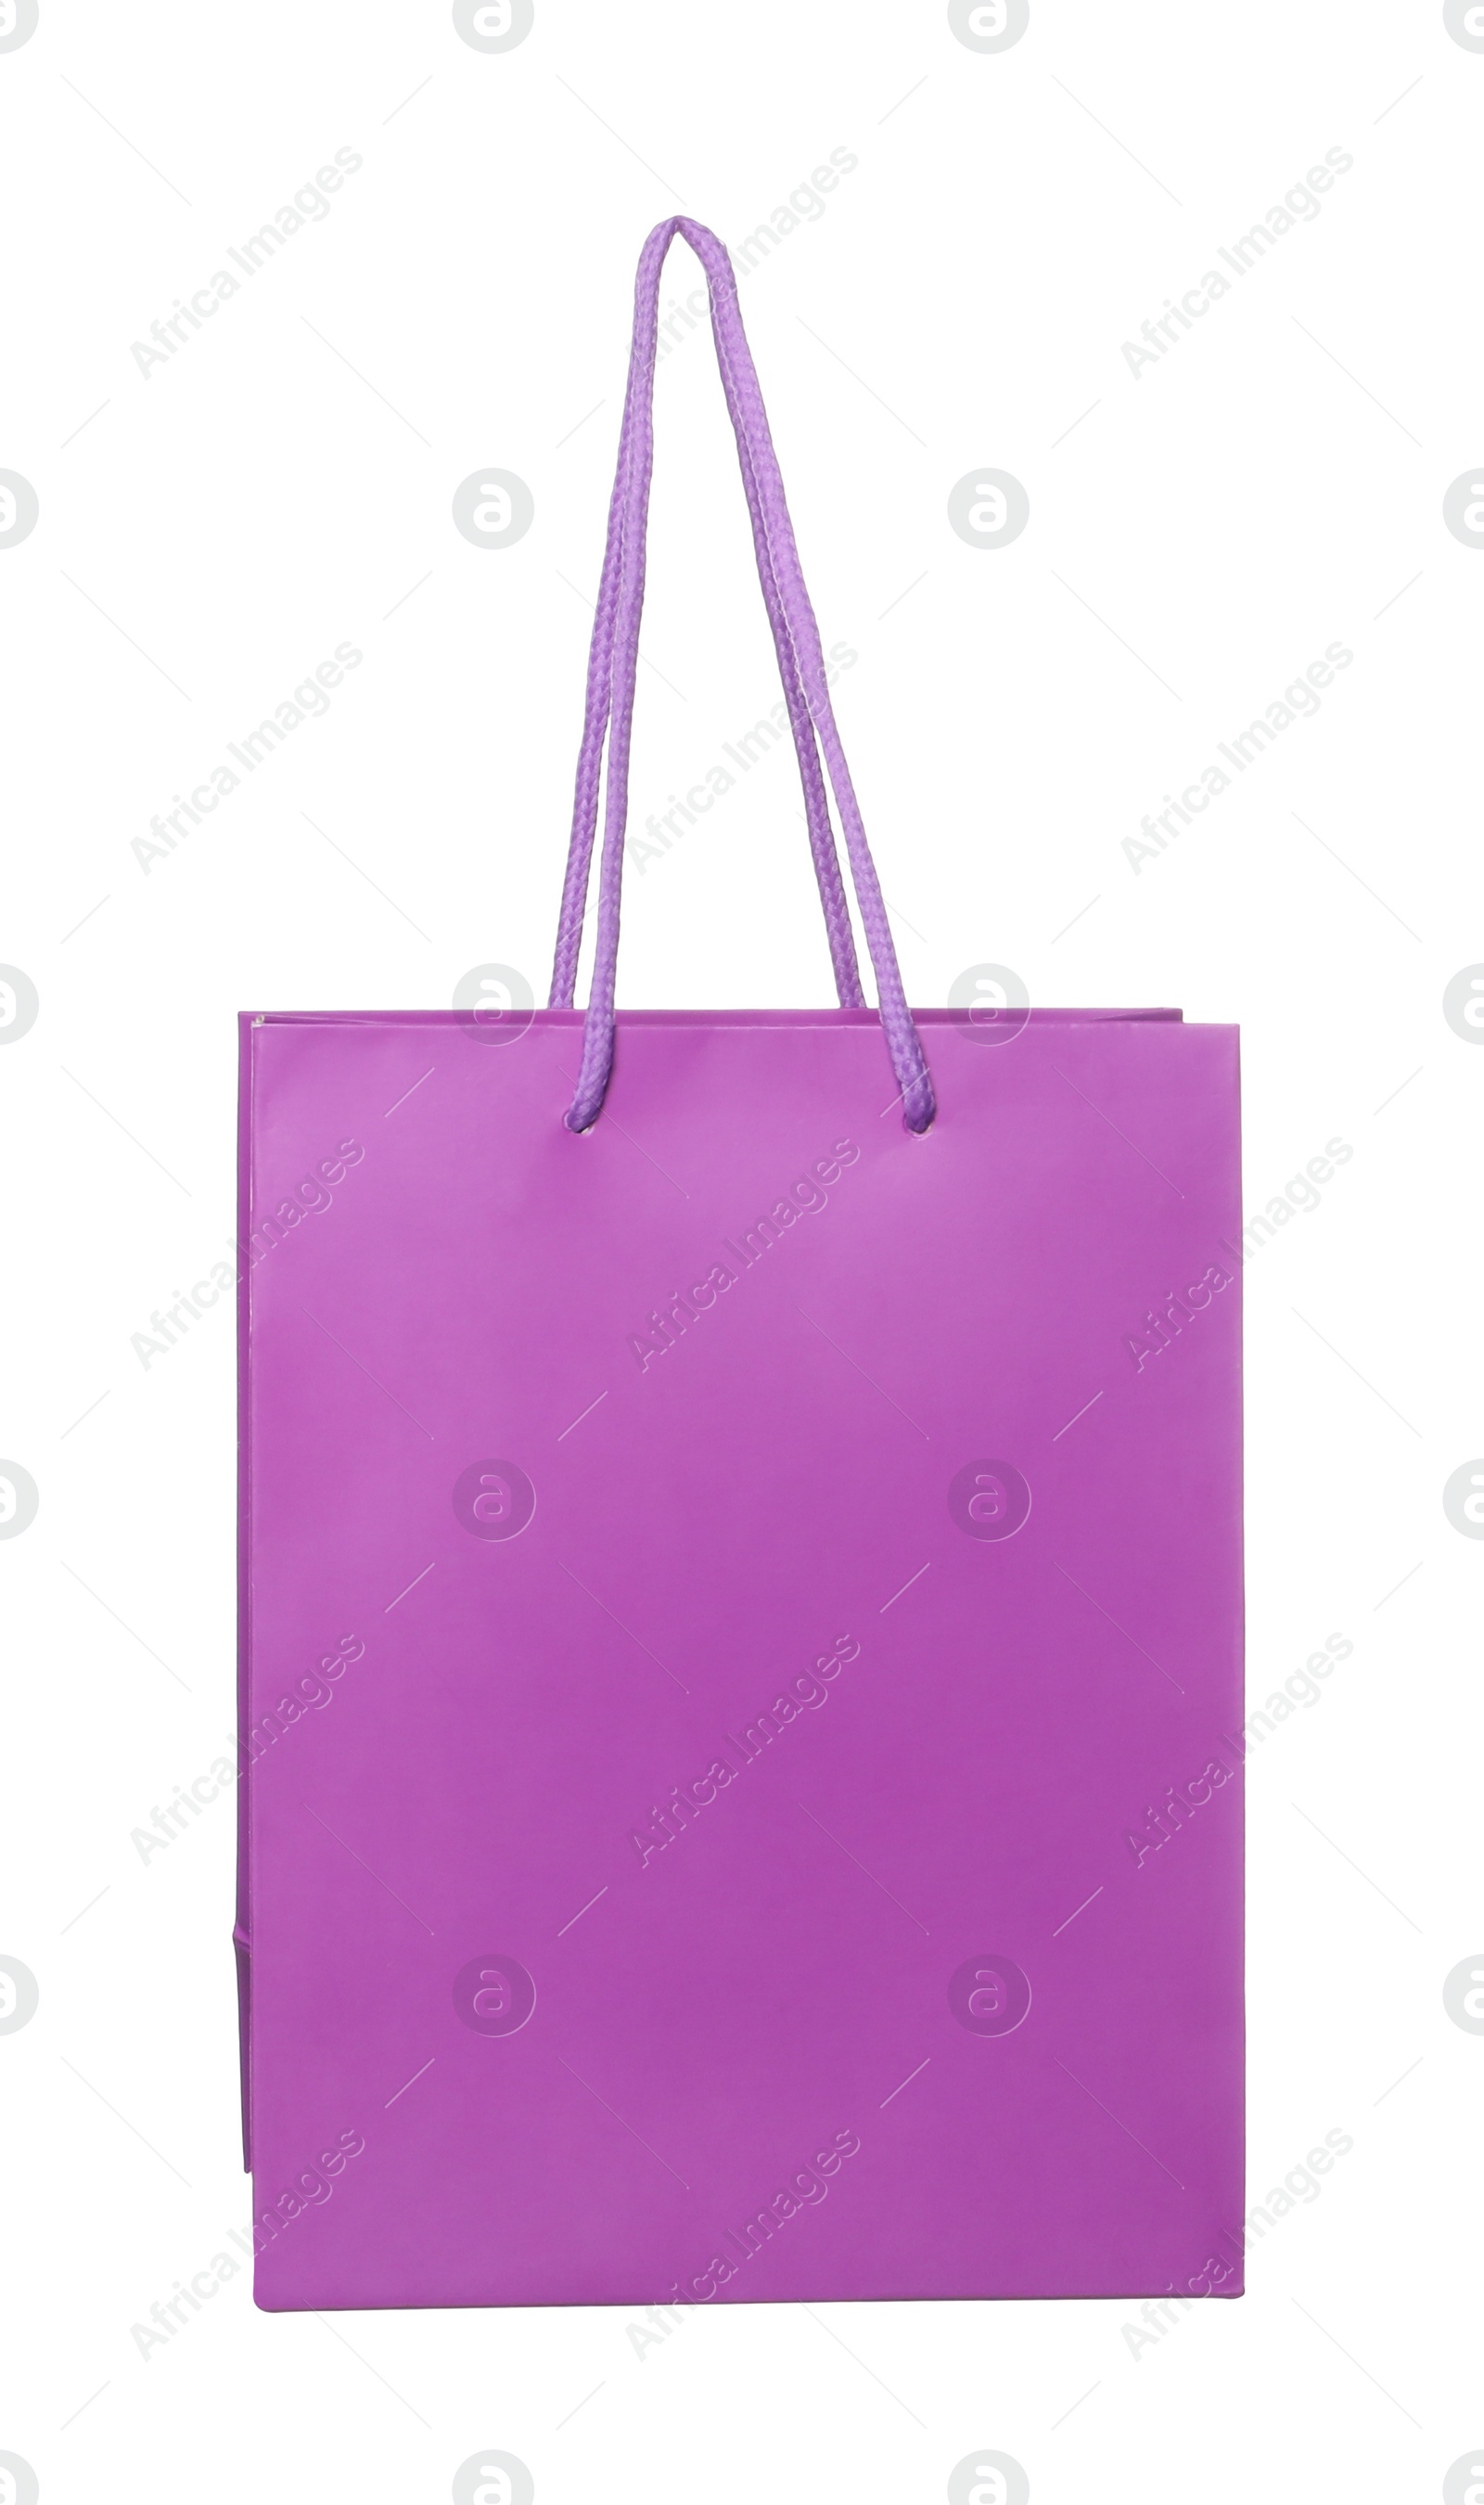 Photo of One purple shopping bag isolated on white